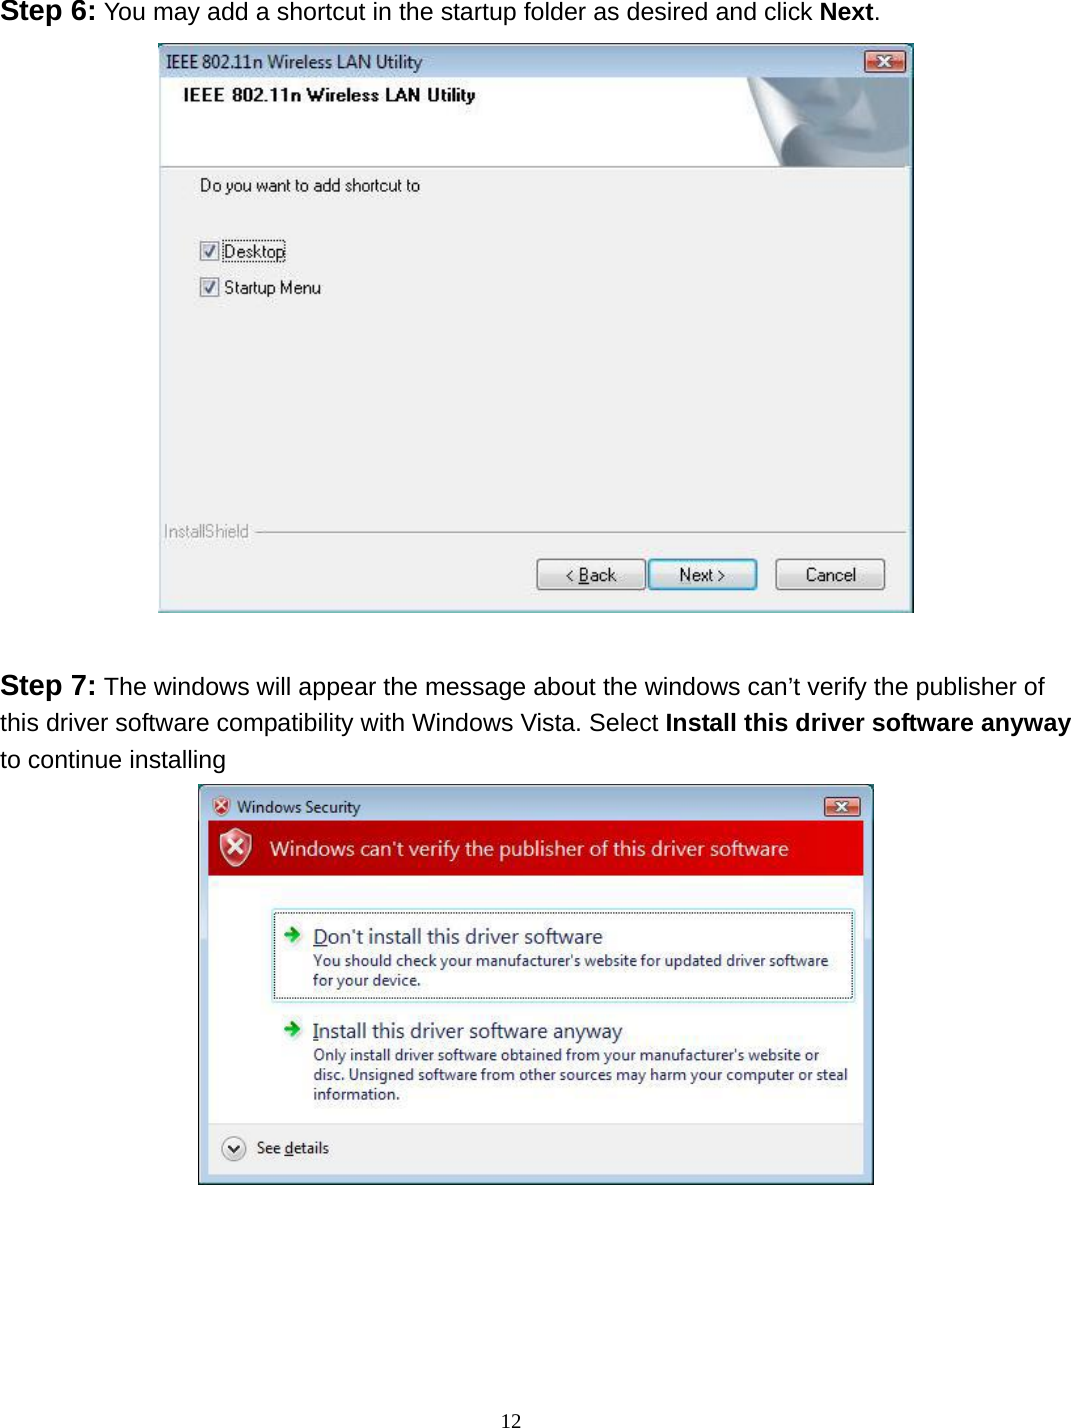  12 Step 6: You may add a shortcut in the startup folder as desired and click Next.   Step 7: The windows will appear the message about the windows can’t verify the publisher of this driver software compatibility with Windows Vista. Select Install this driver software anyway to continue installing  